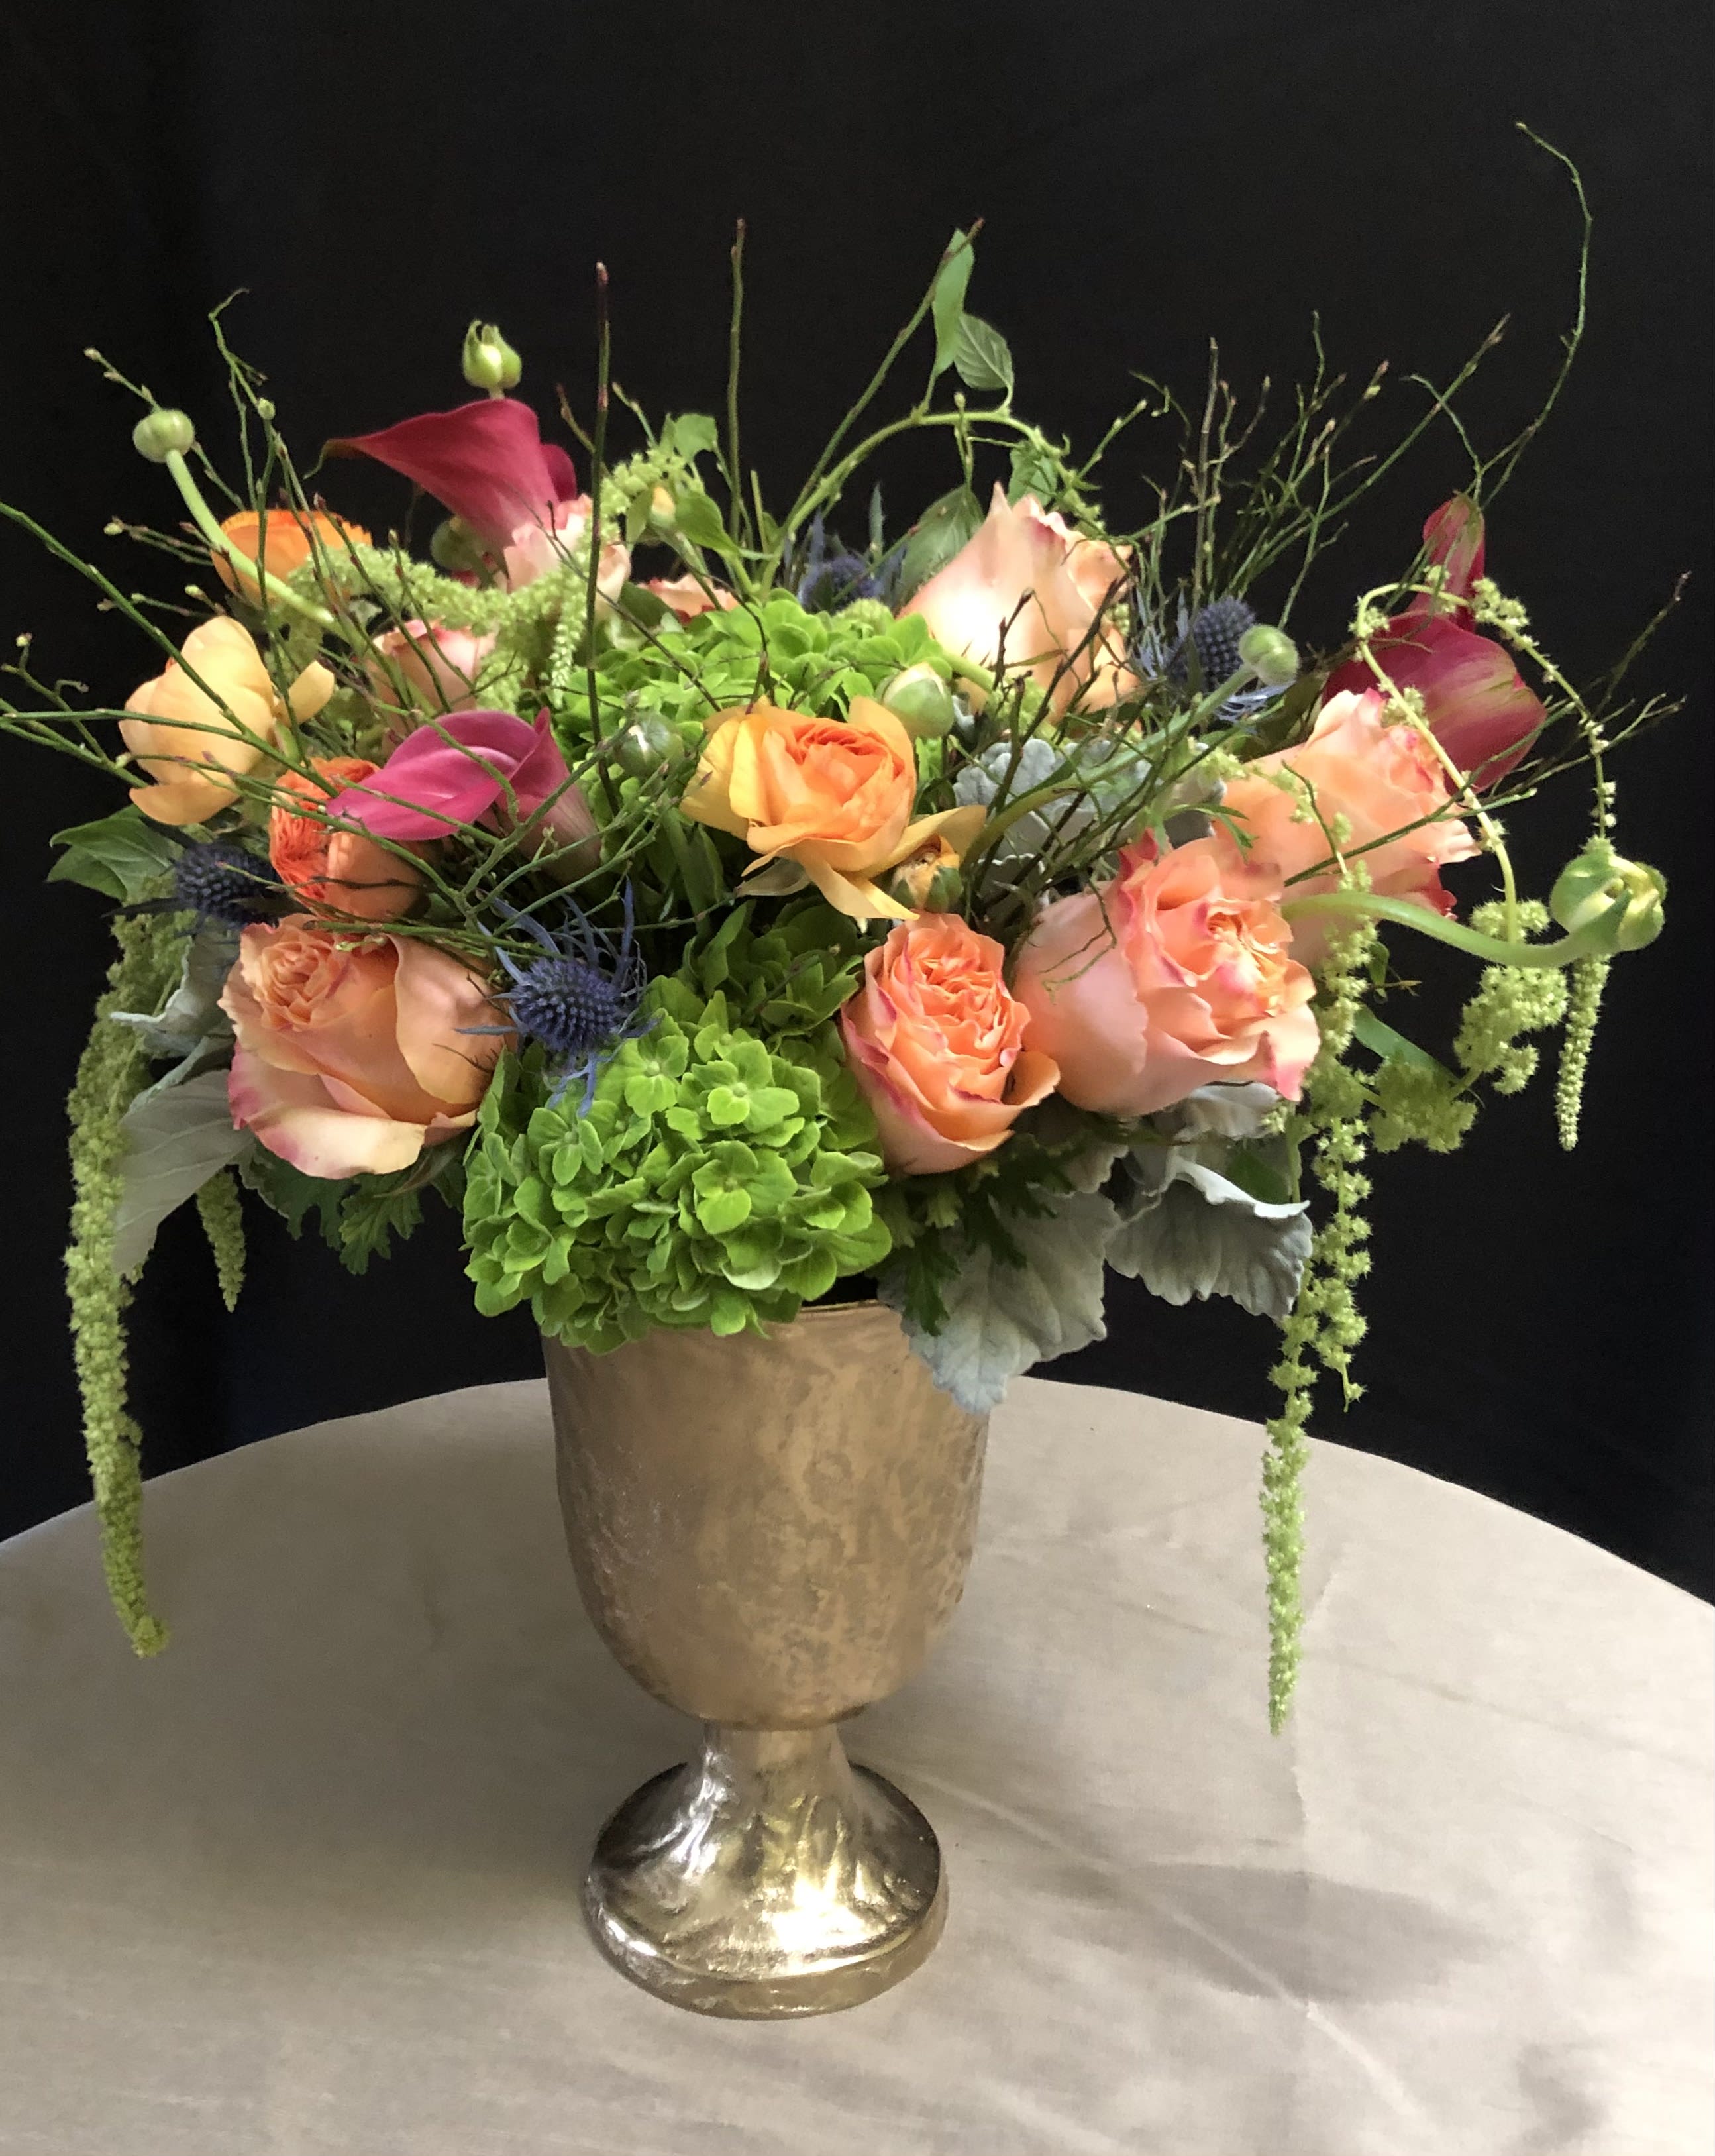 Renaissance #EF77 - Wild and natural mixture of gorgeous flowers in a gold metal pedestal vase, Classic look, still Modern that we all are attracted to these days. 